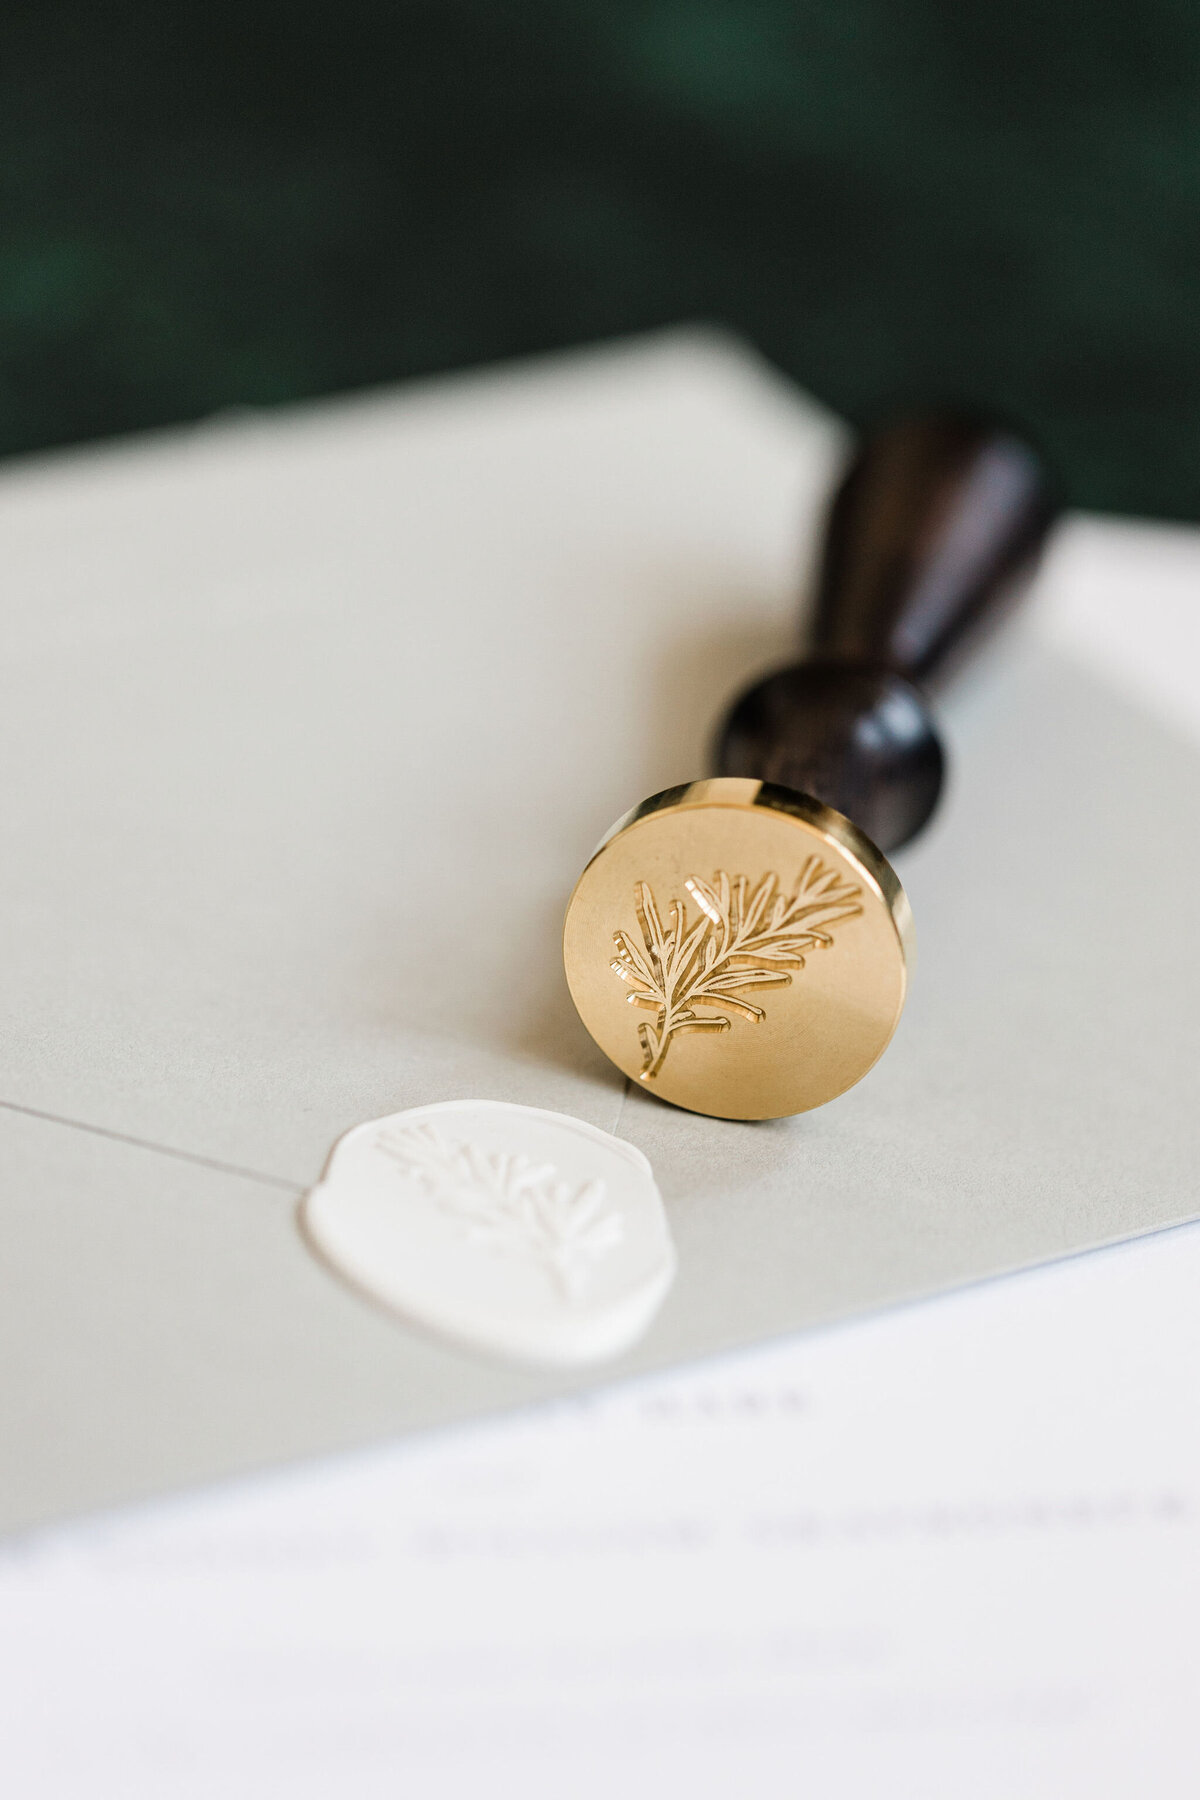 Wedding details like these wax envelope seals can realling add the finishing touch to a wedding gallery.